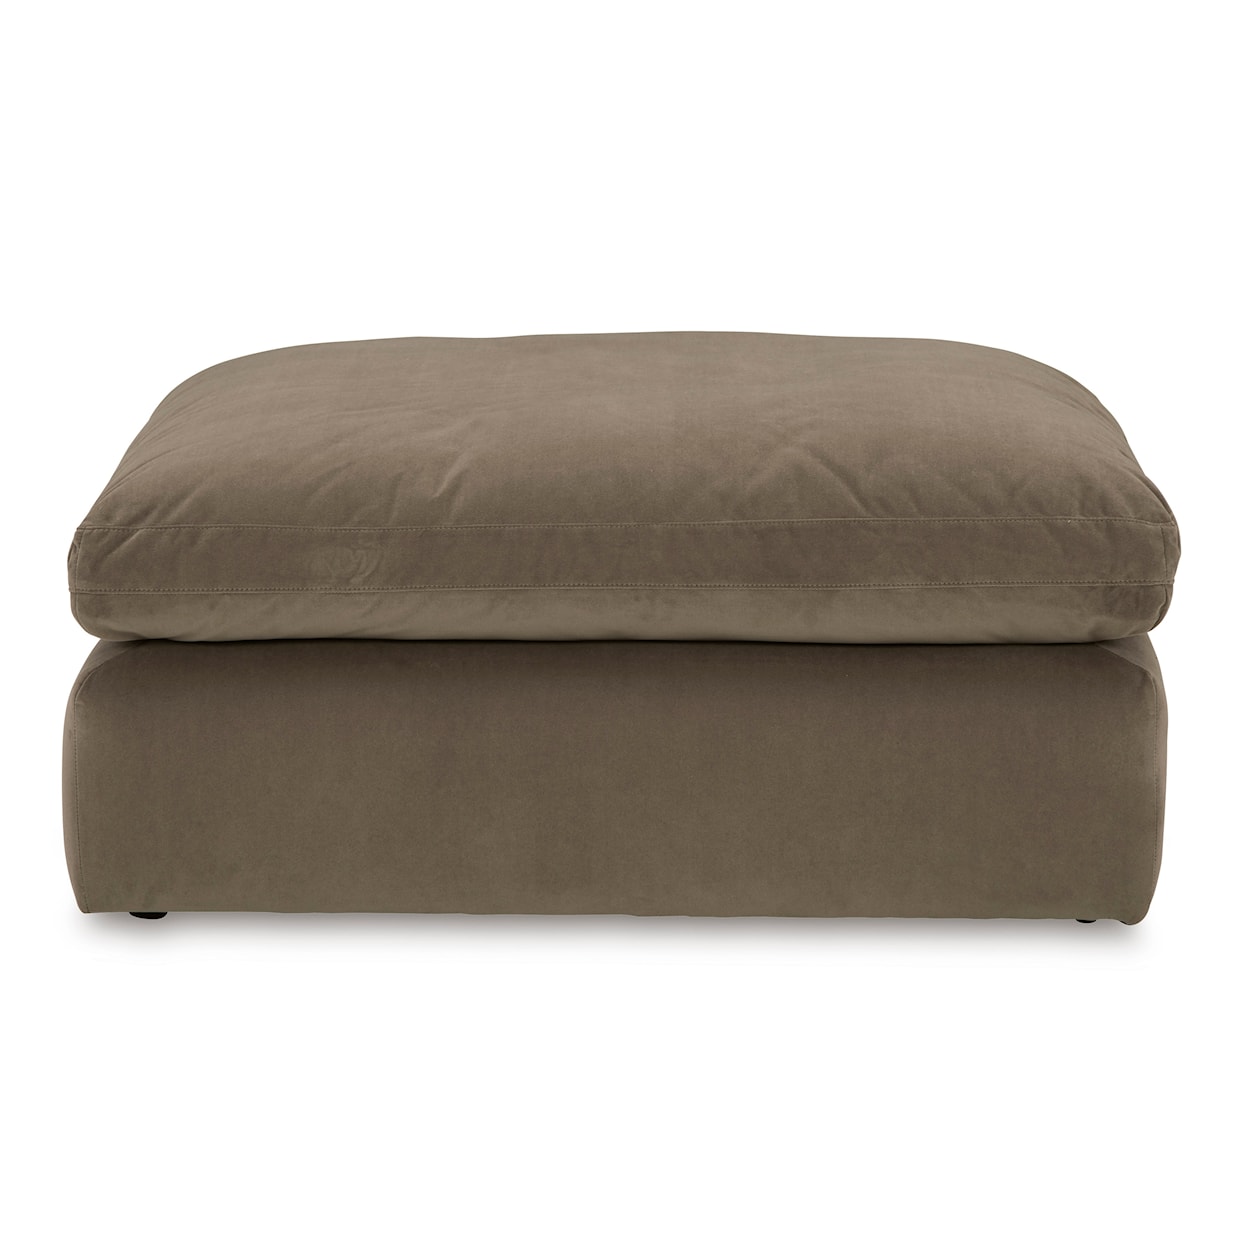 Benchcraft Sophie Oversized Accent Ottoman